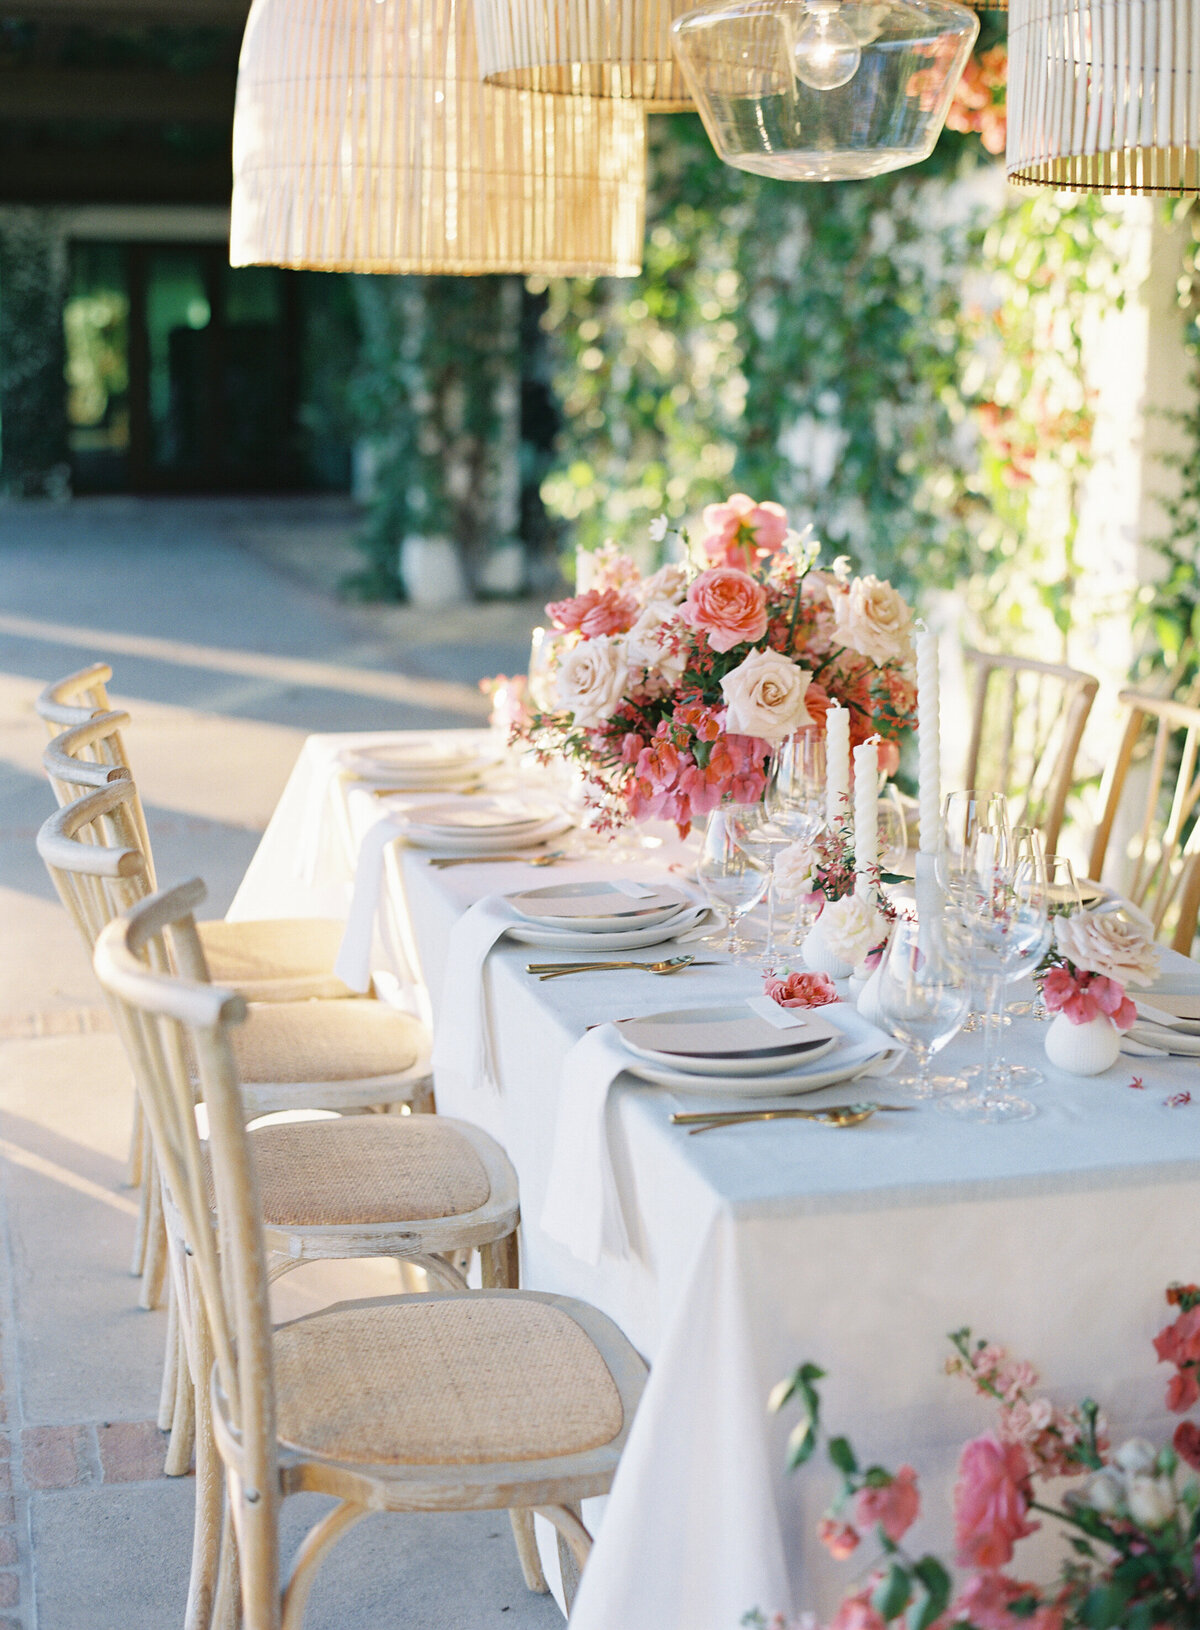 Table inspiration for a Montecito Club Wedding in Santa Barbara. Wedding Photography by Pinnel Photography